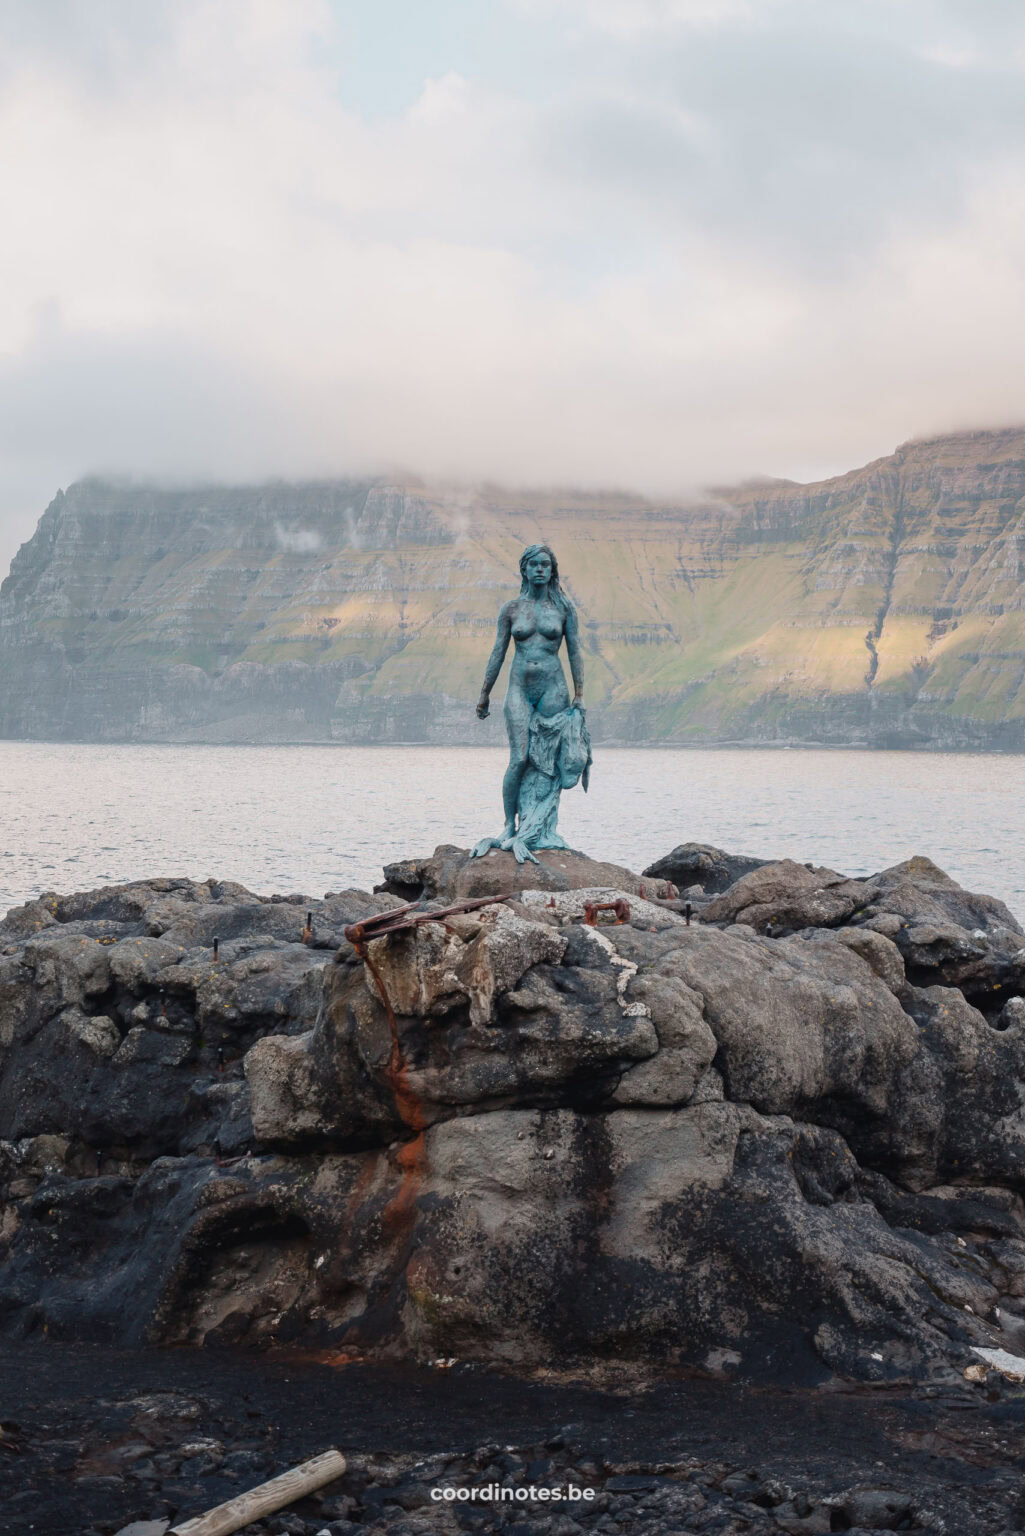 Kópakonan, the statue of the Seal woman in Mikladalur